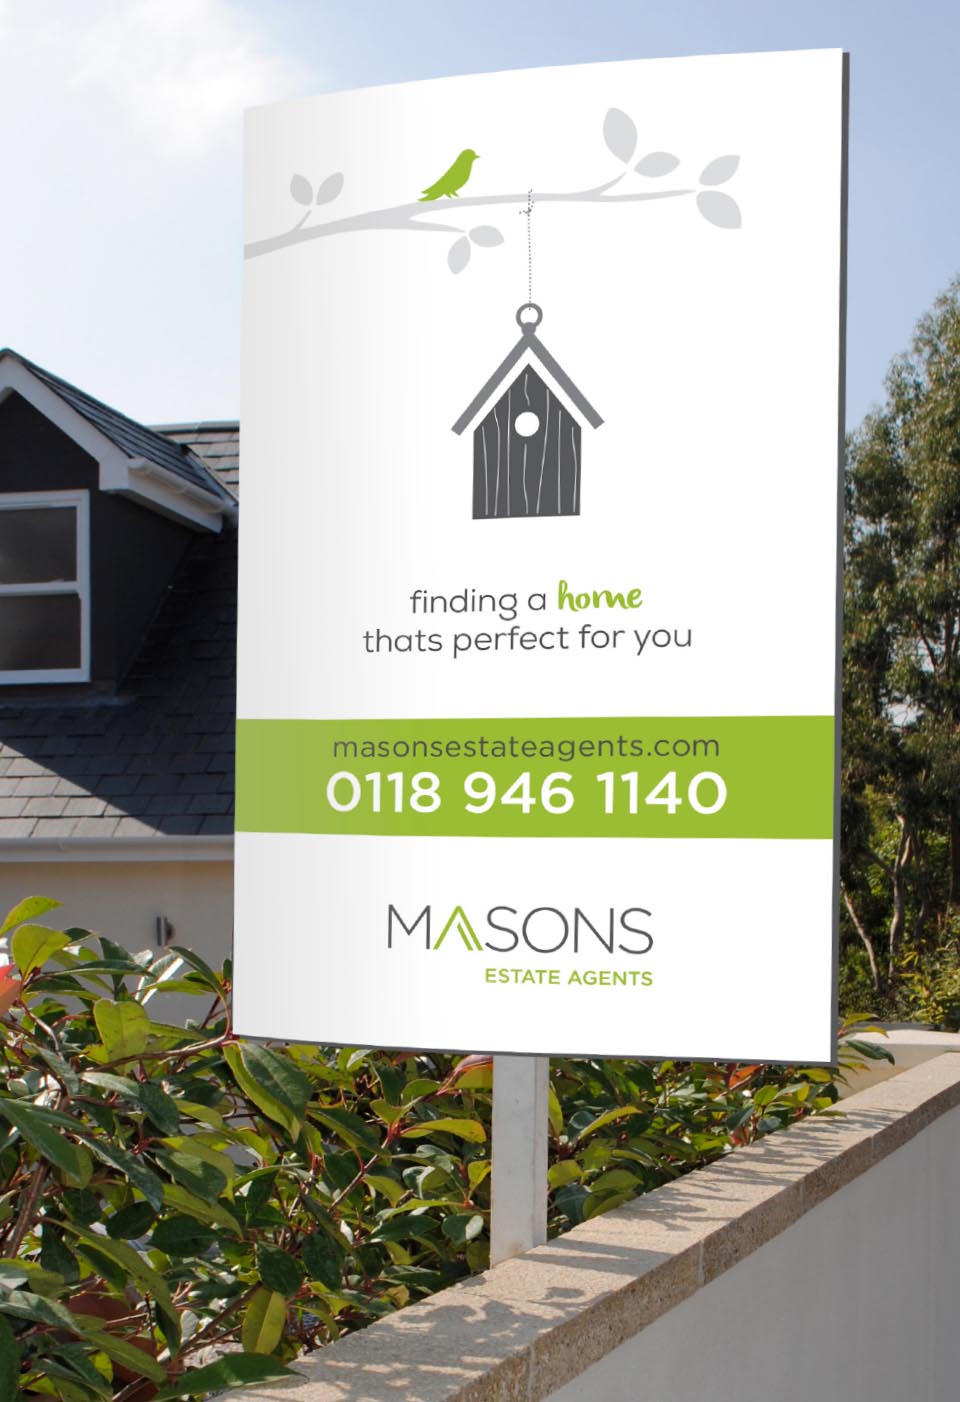 Masons-Estate-Agents-Advertising-Campaign-Reading-Sign